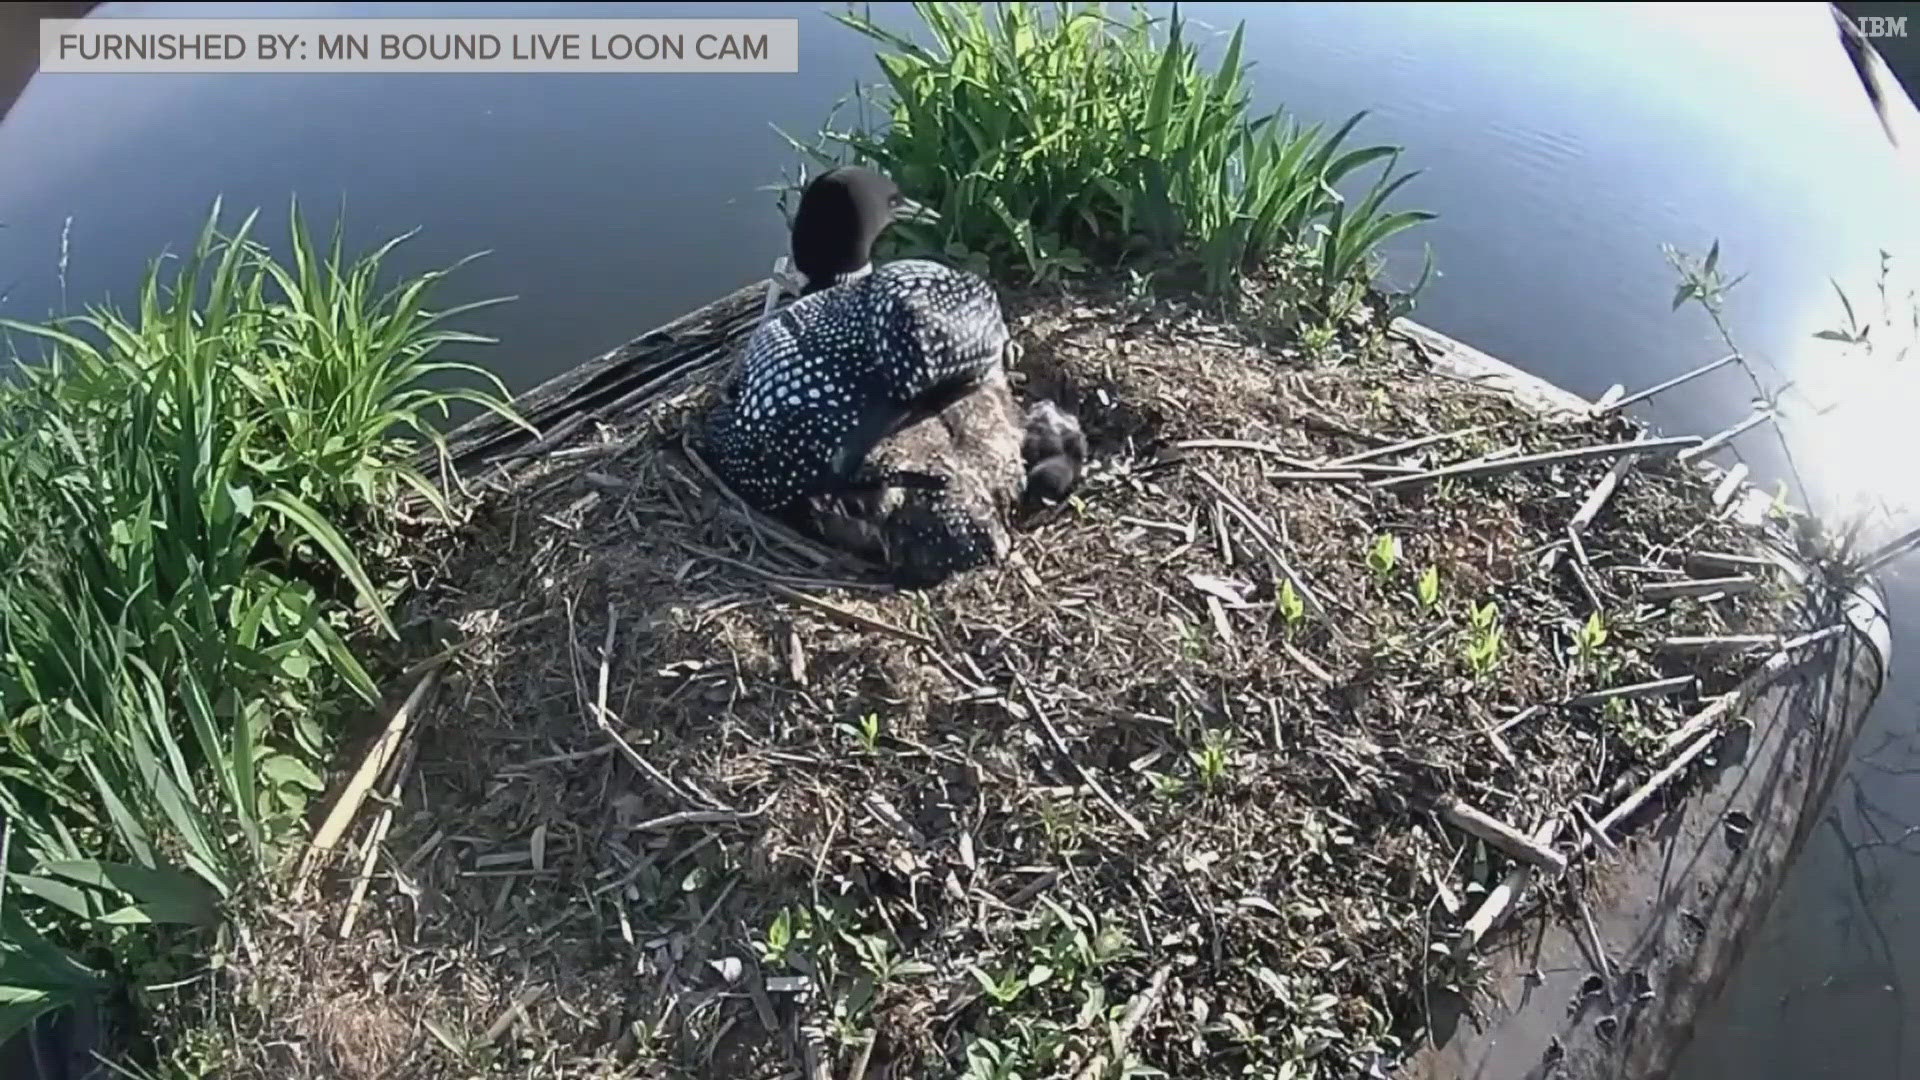 The Live Loon Cam went away four years ago, but Larry Backlund has continued to bring out the nesting platform — a tradition he started 20 years ago.